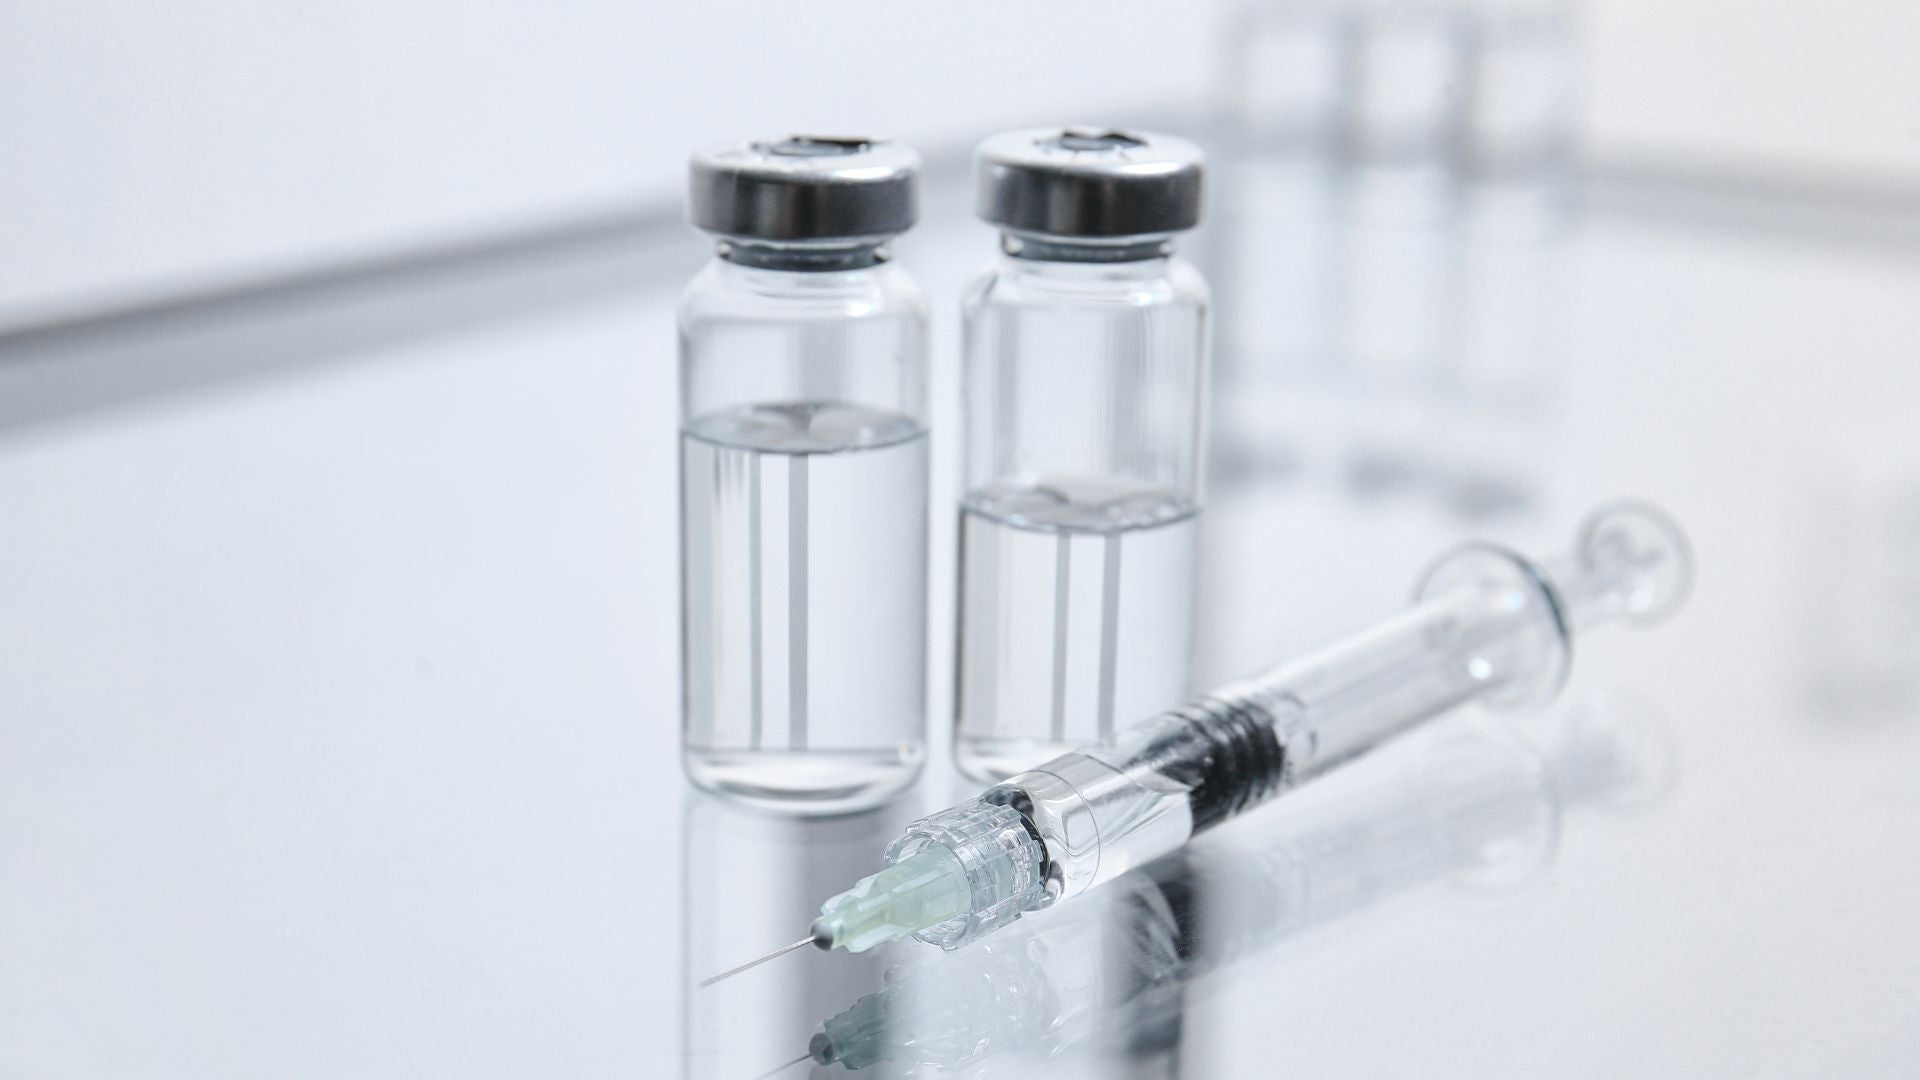 dermal fillers and syringe for injections